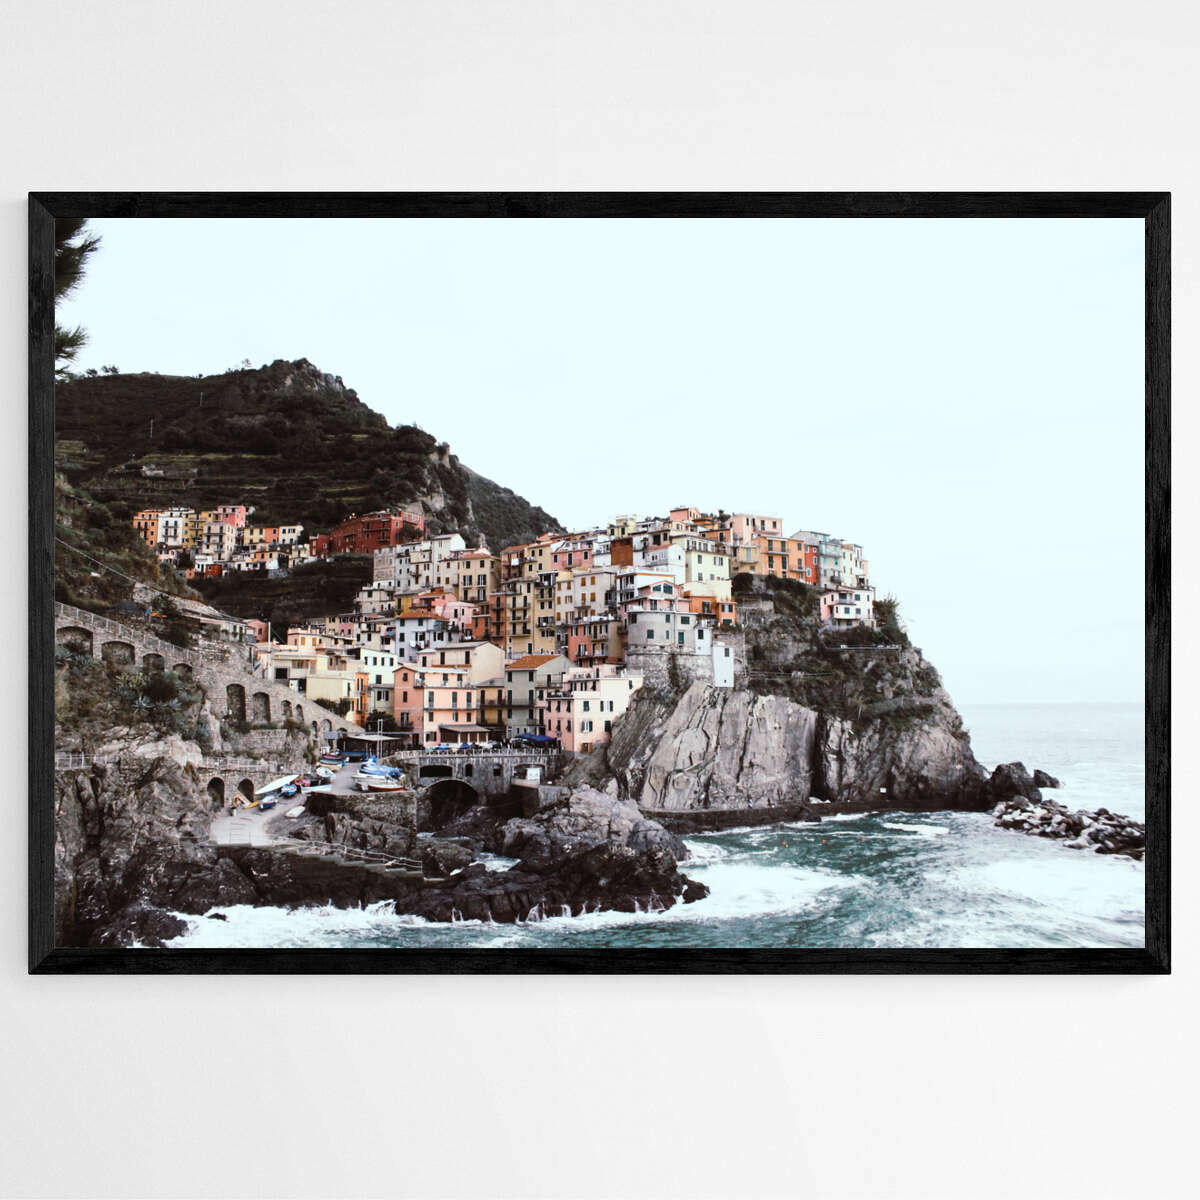 Cinque Terre Seaside Town in Italy | Beachside Wall Art Prints - The Canvas Hive